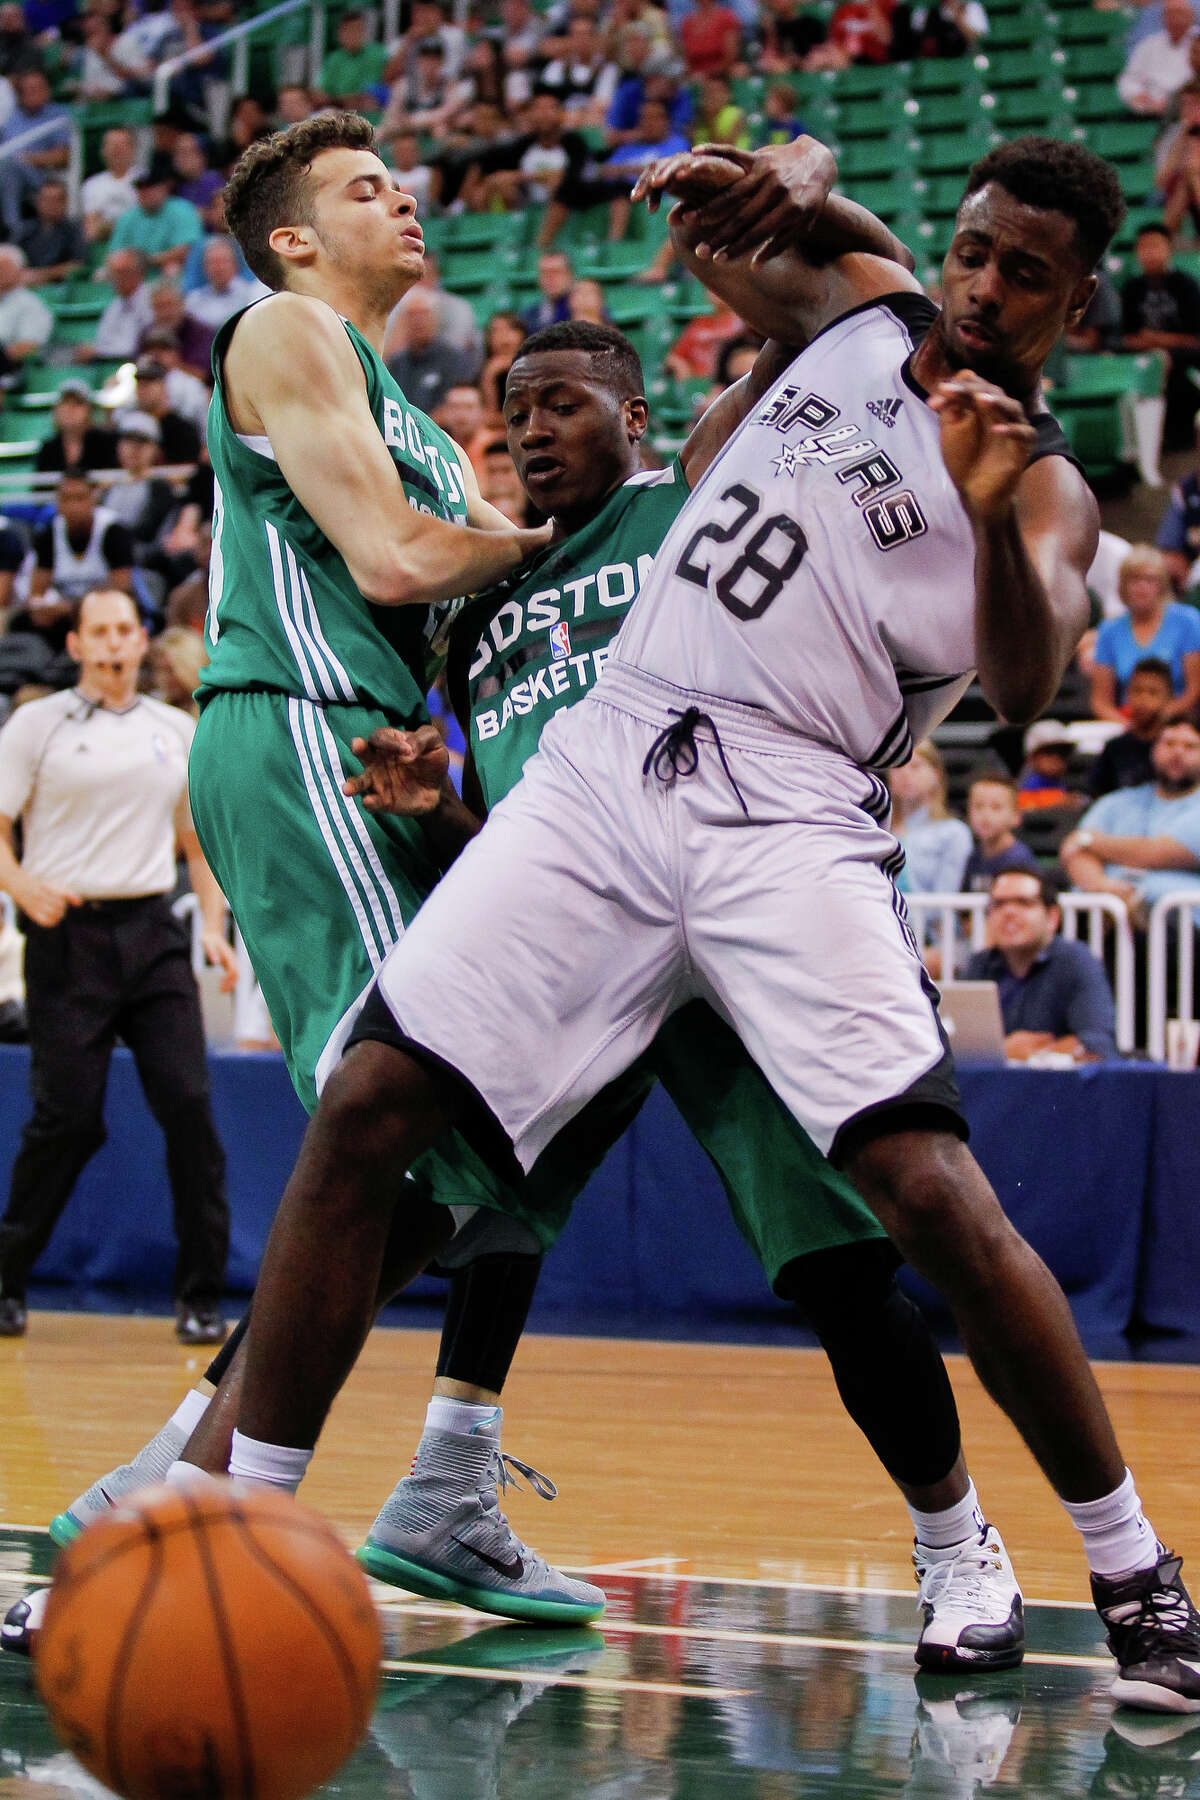 A foul is called on Boston’s Terry Rozier as he and the Spurs’ Livio Jean-Charles compete for a rebound during an NBA Summer League game on July 9, 2015 at EnergySolutions Arena in Salt Lake City.